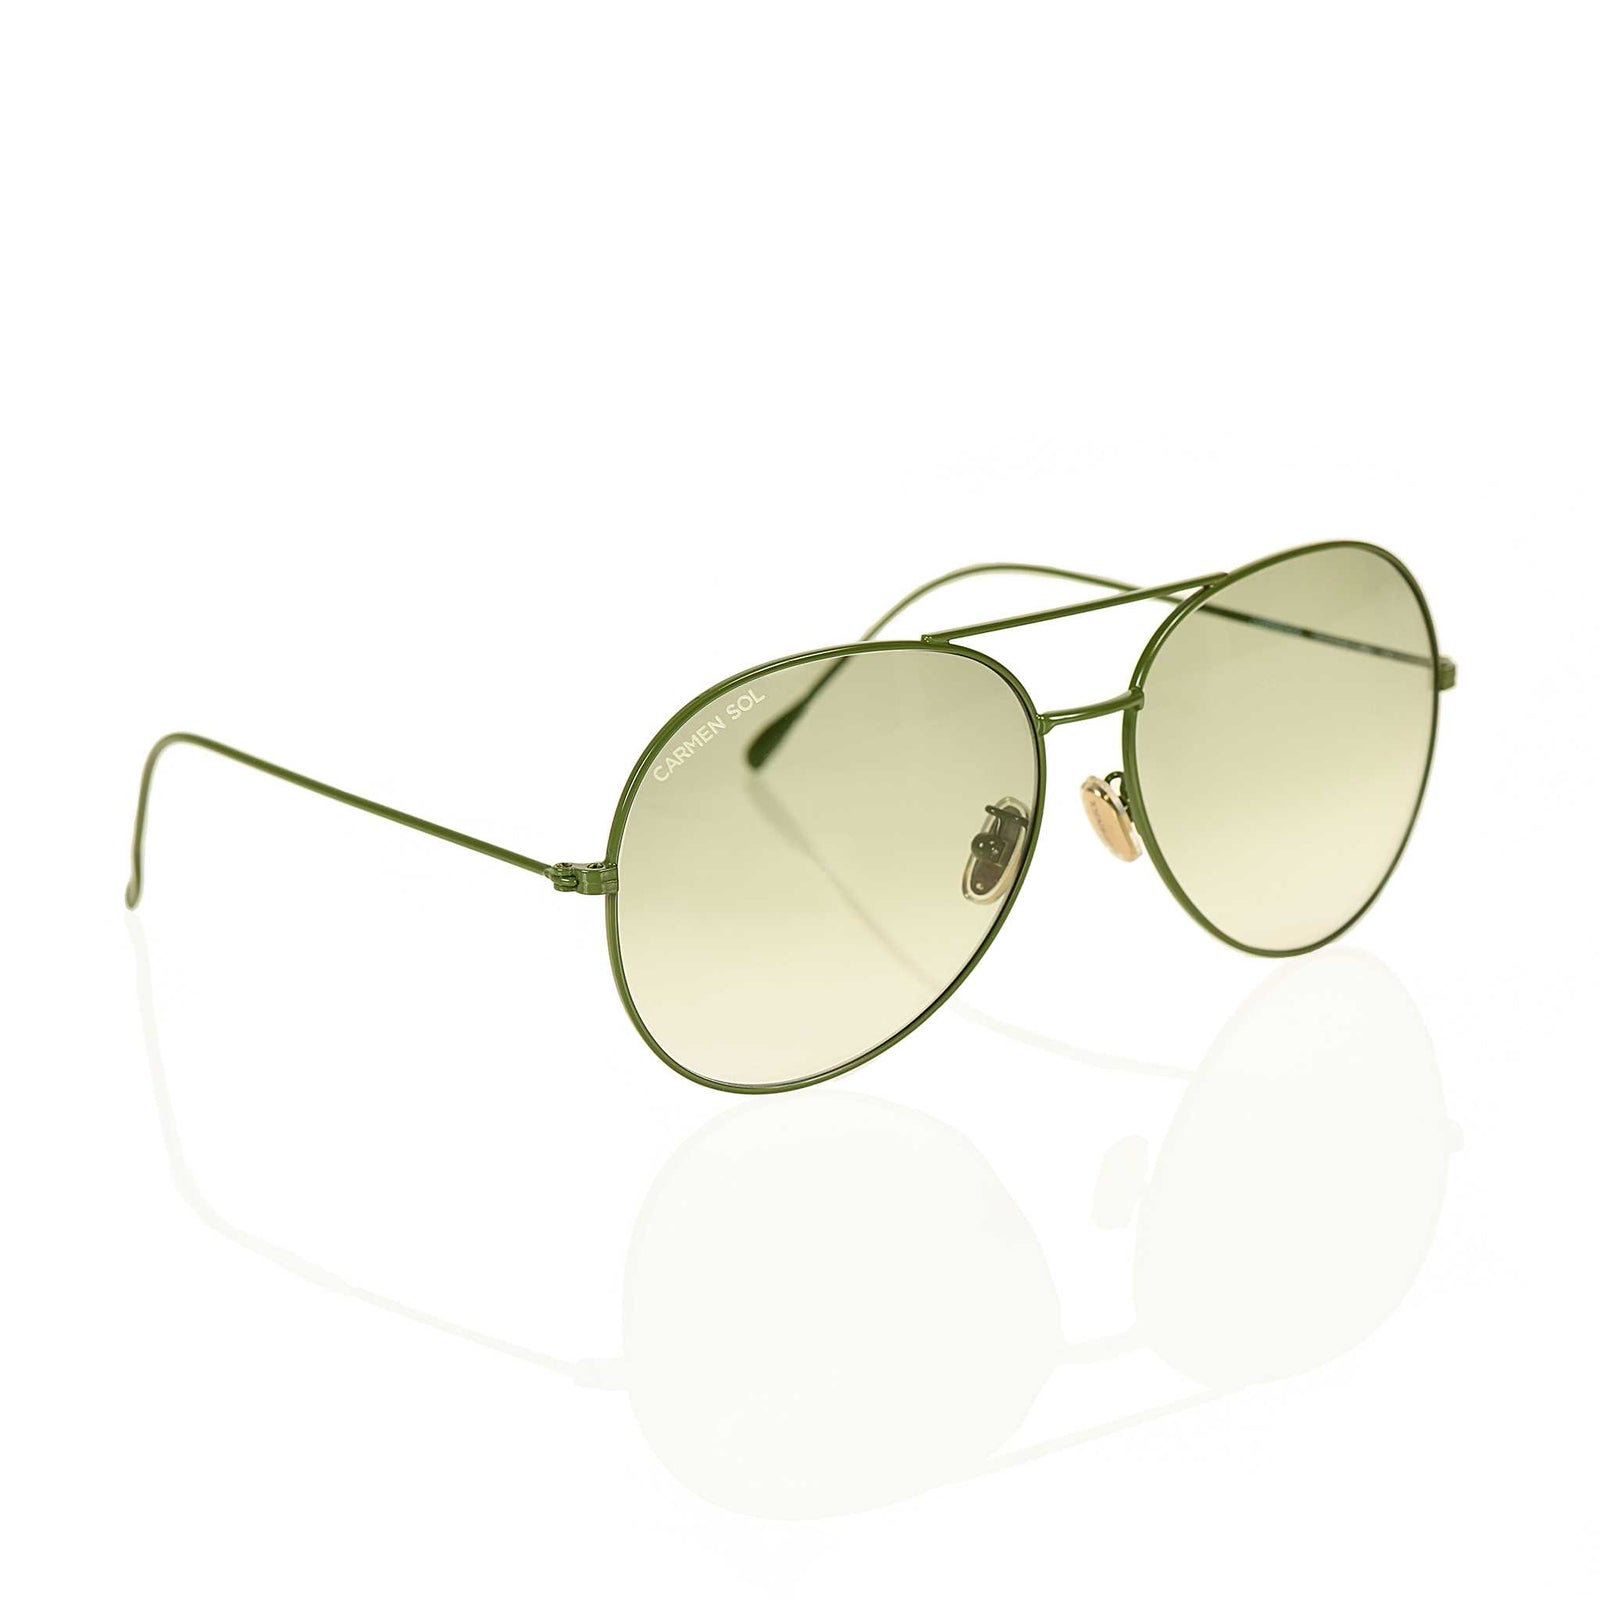 Olive green sunglasses for women with olive green lenses